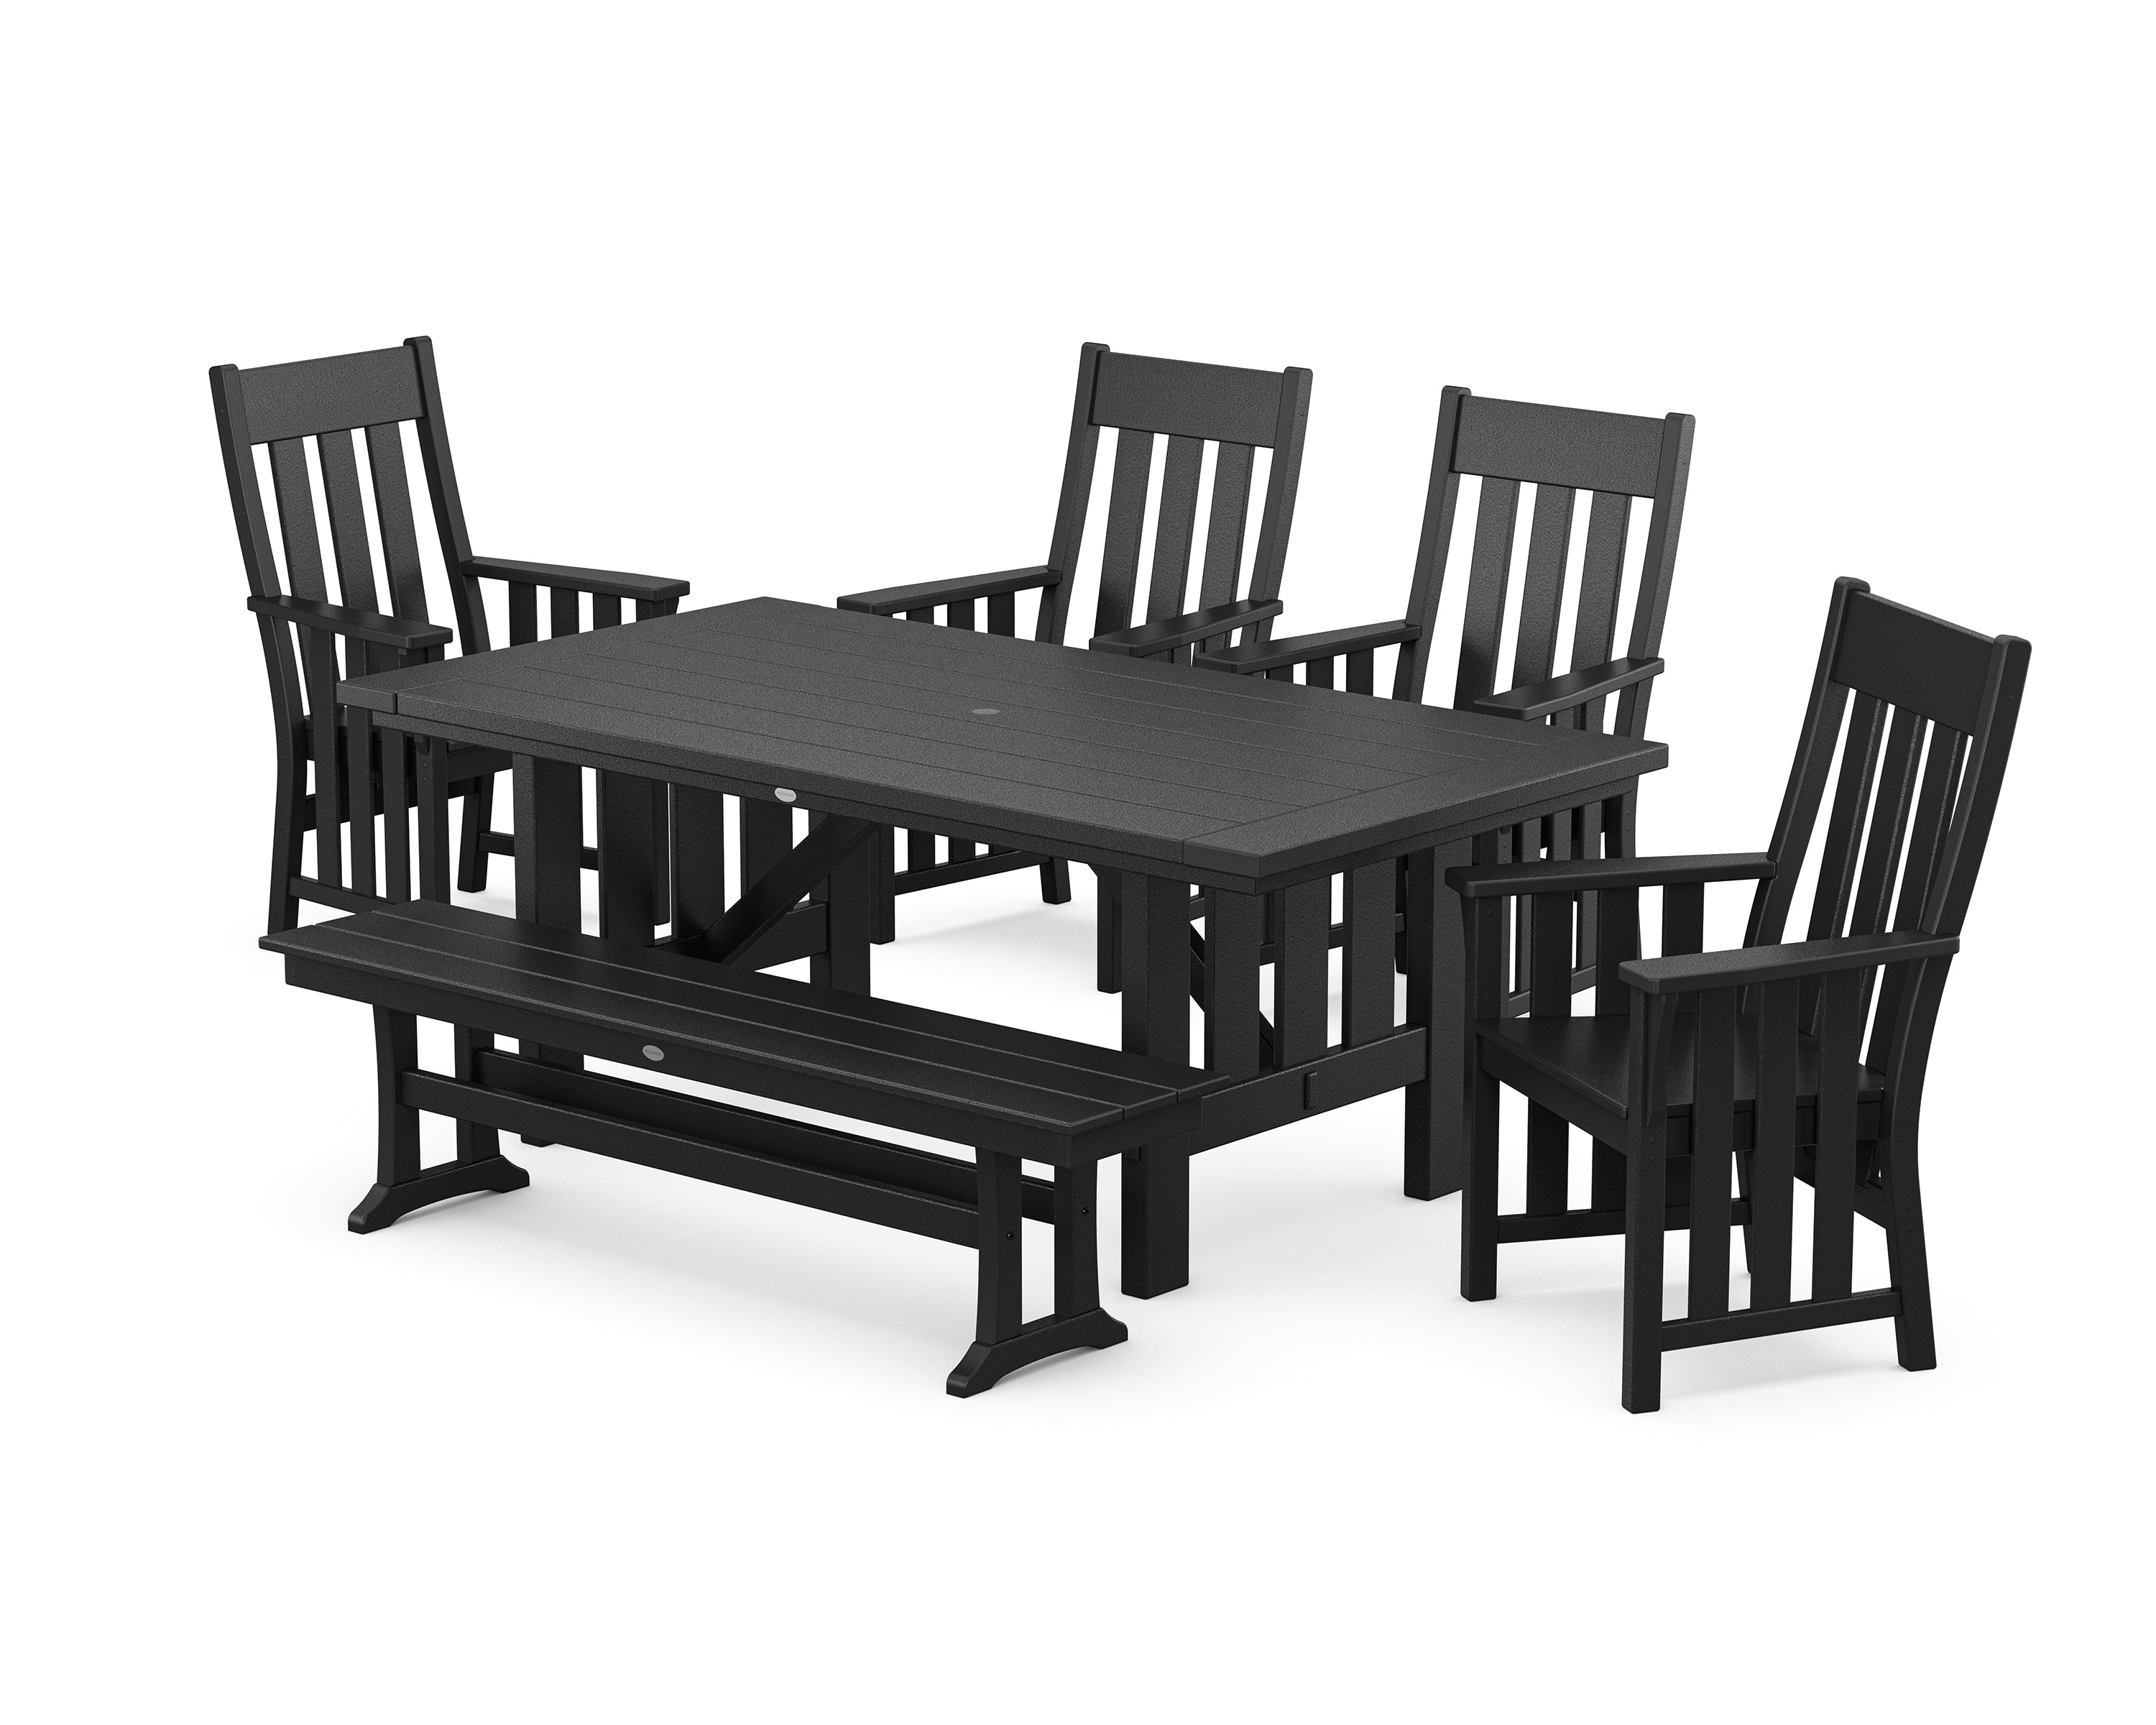 Martha Stewart by POLYWOOD® Acadia 6-Piece Dining Set with Bench in Black